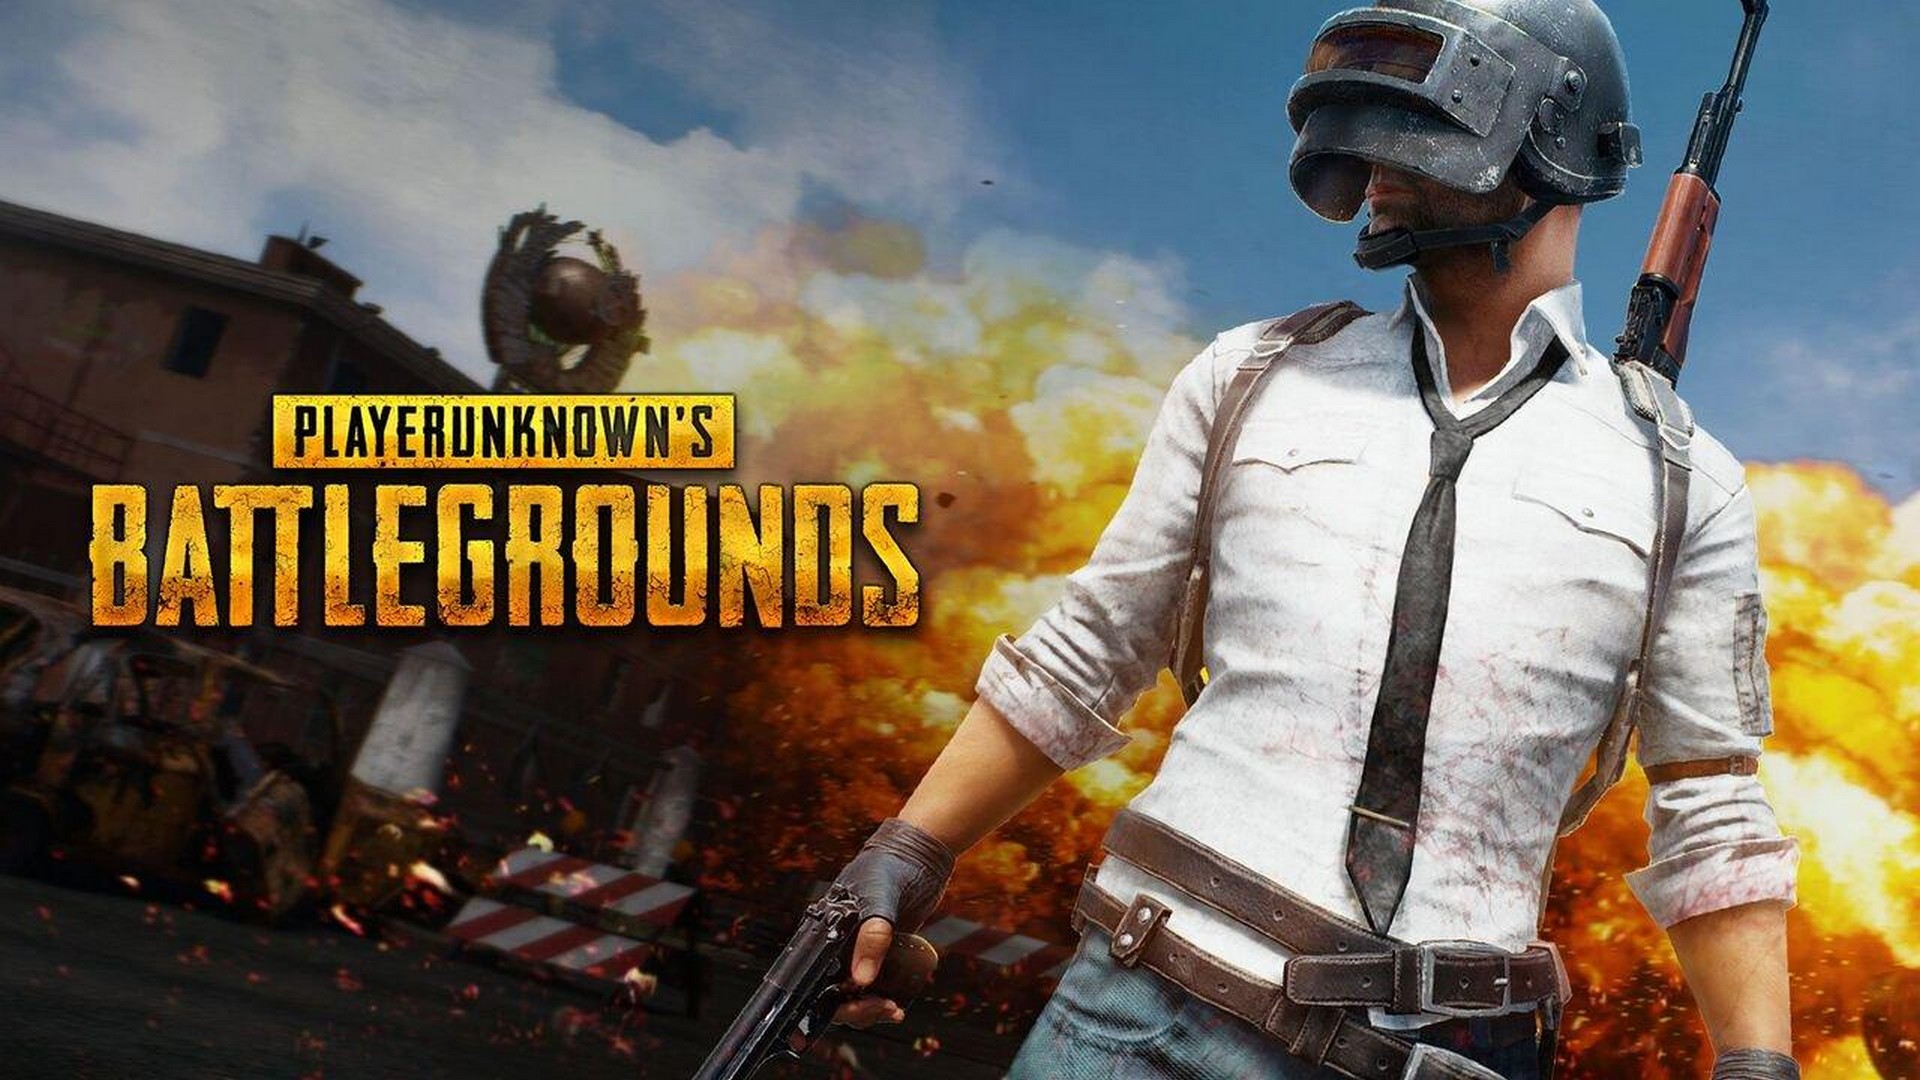 Desktop Wallpaper PUBG New Update with image resolution 1920x1080 pixel. You can use this wallpaper as background for your desktop Computer Screensavers, Android or iPhone smartphones